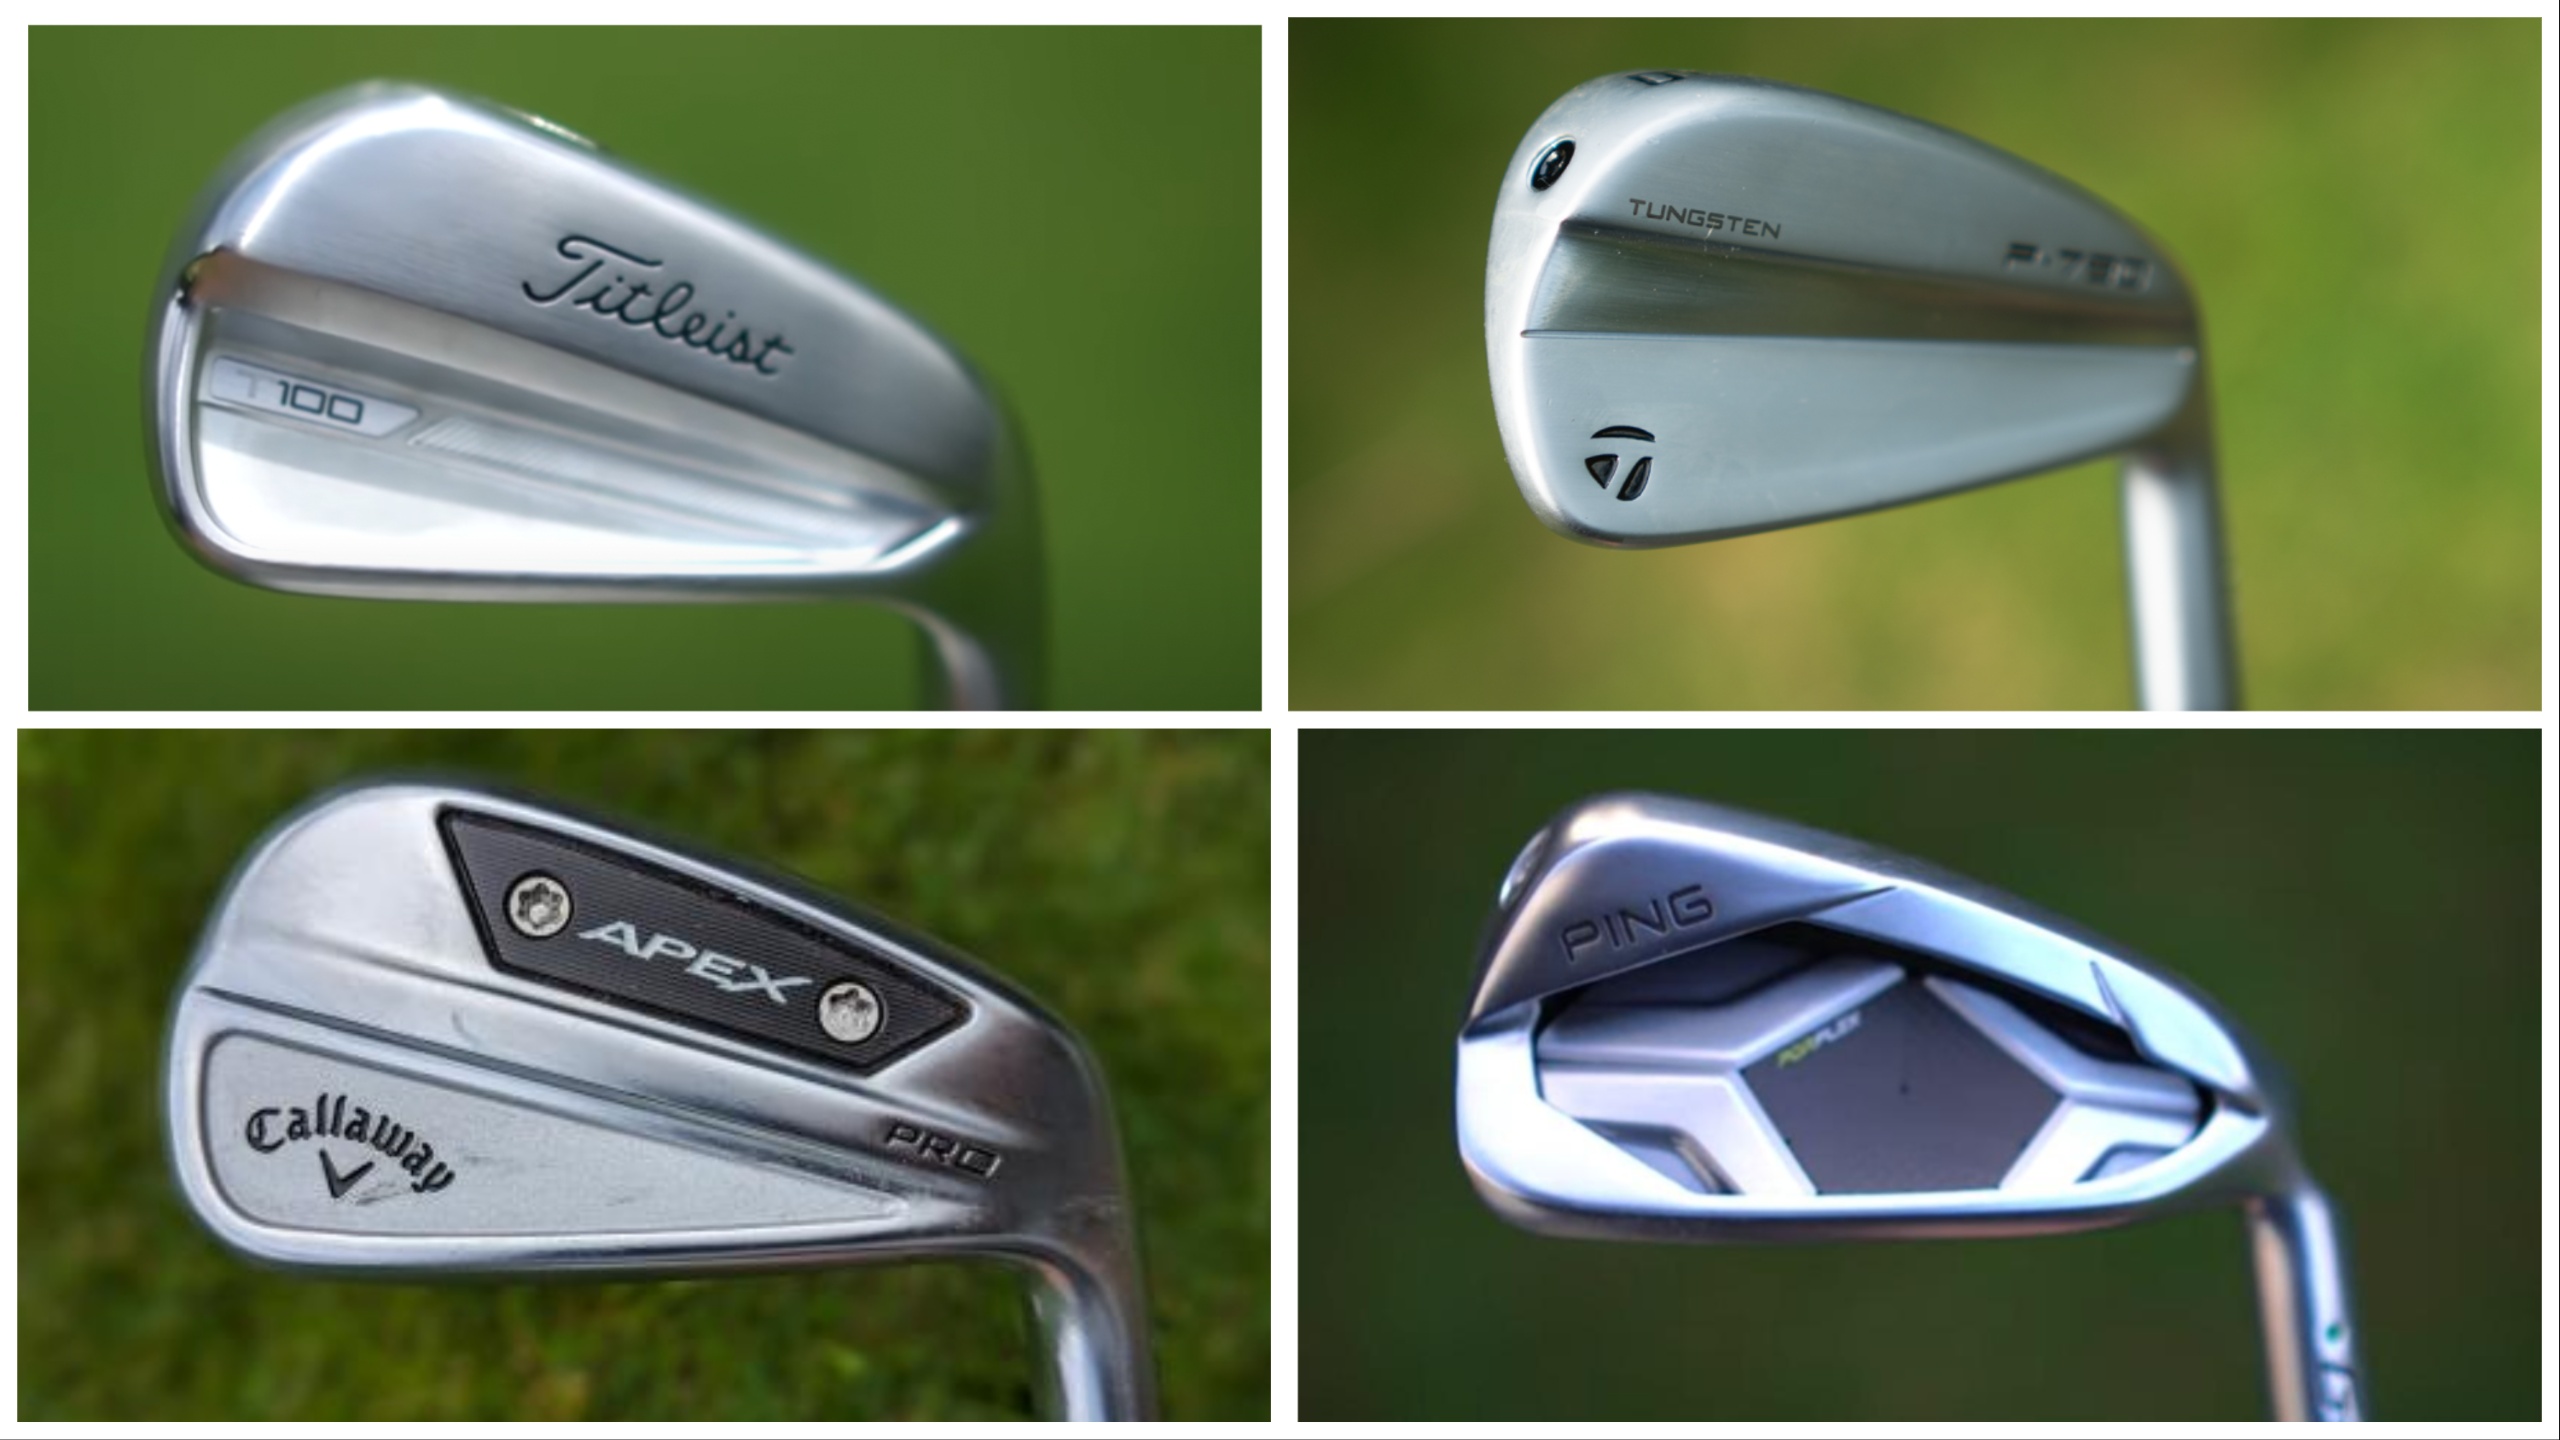 Irons from VEGA Golf - Classic Line & Star Line